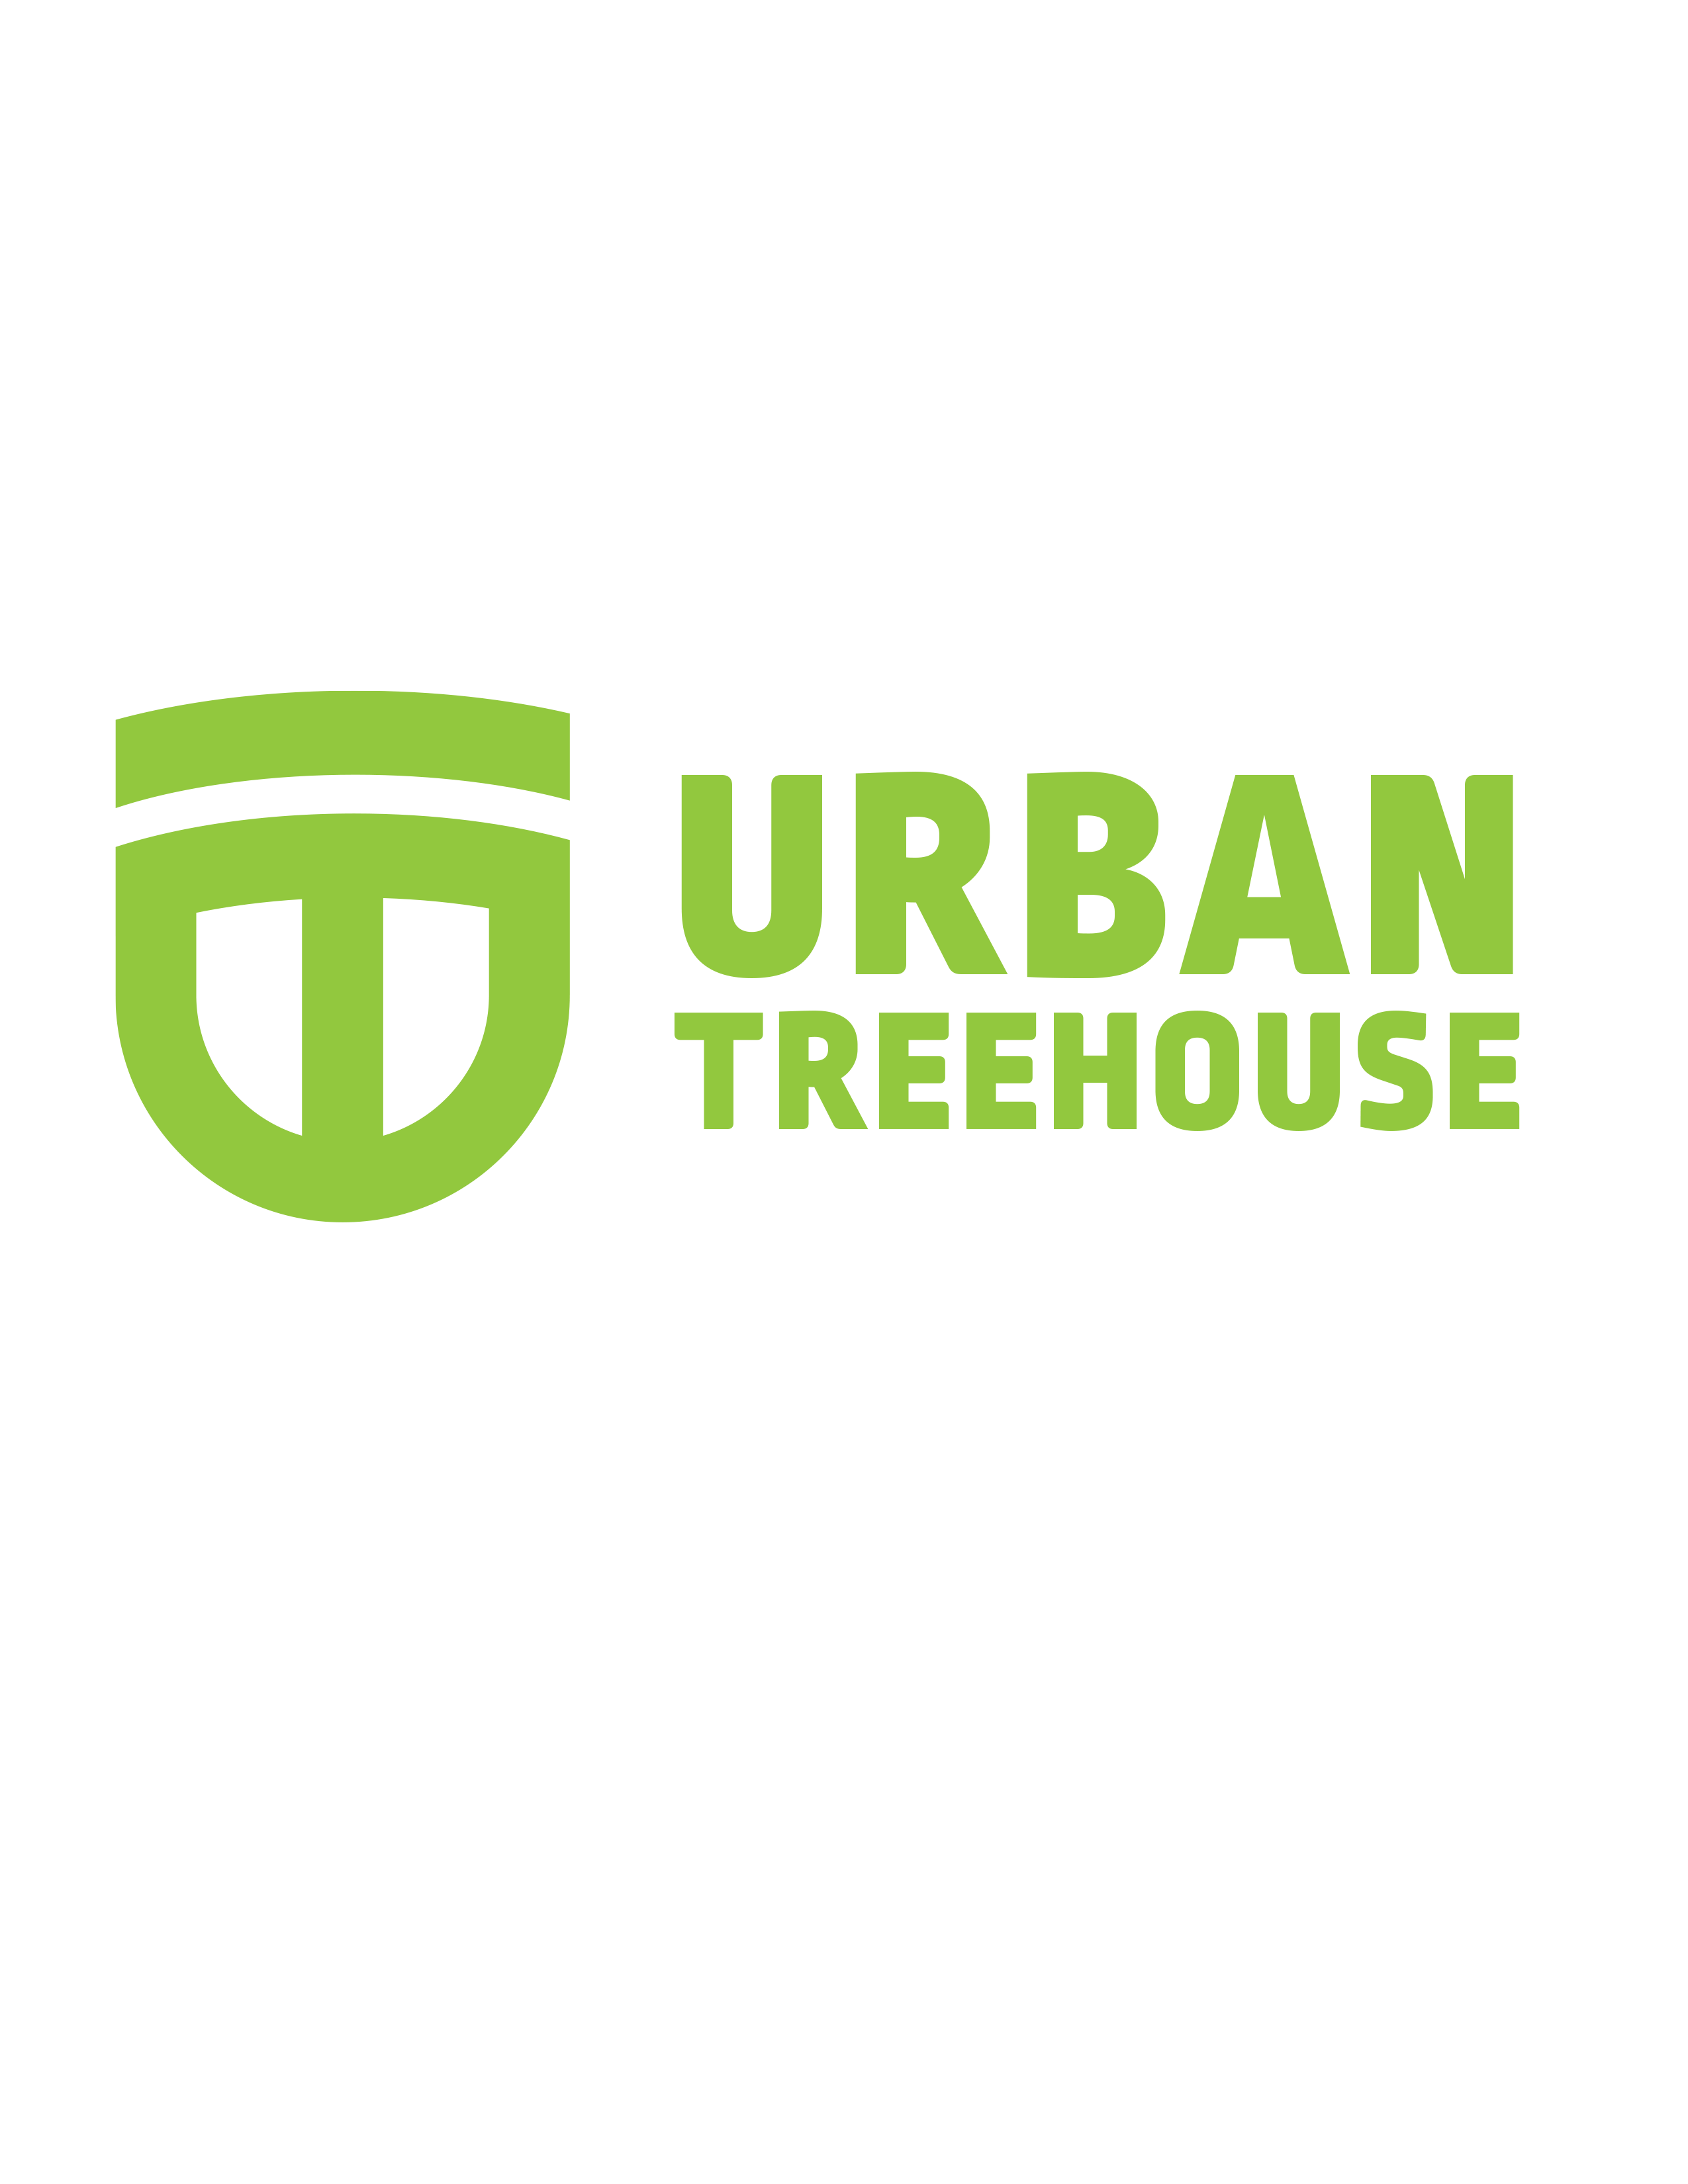 Urban Treehouse for website logo design by logo designer Carson Krause Design for your inspiration and for the worlds largest logo competition